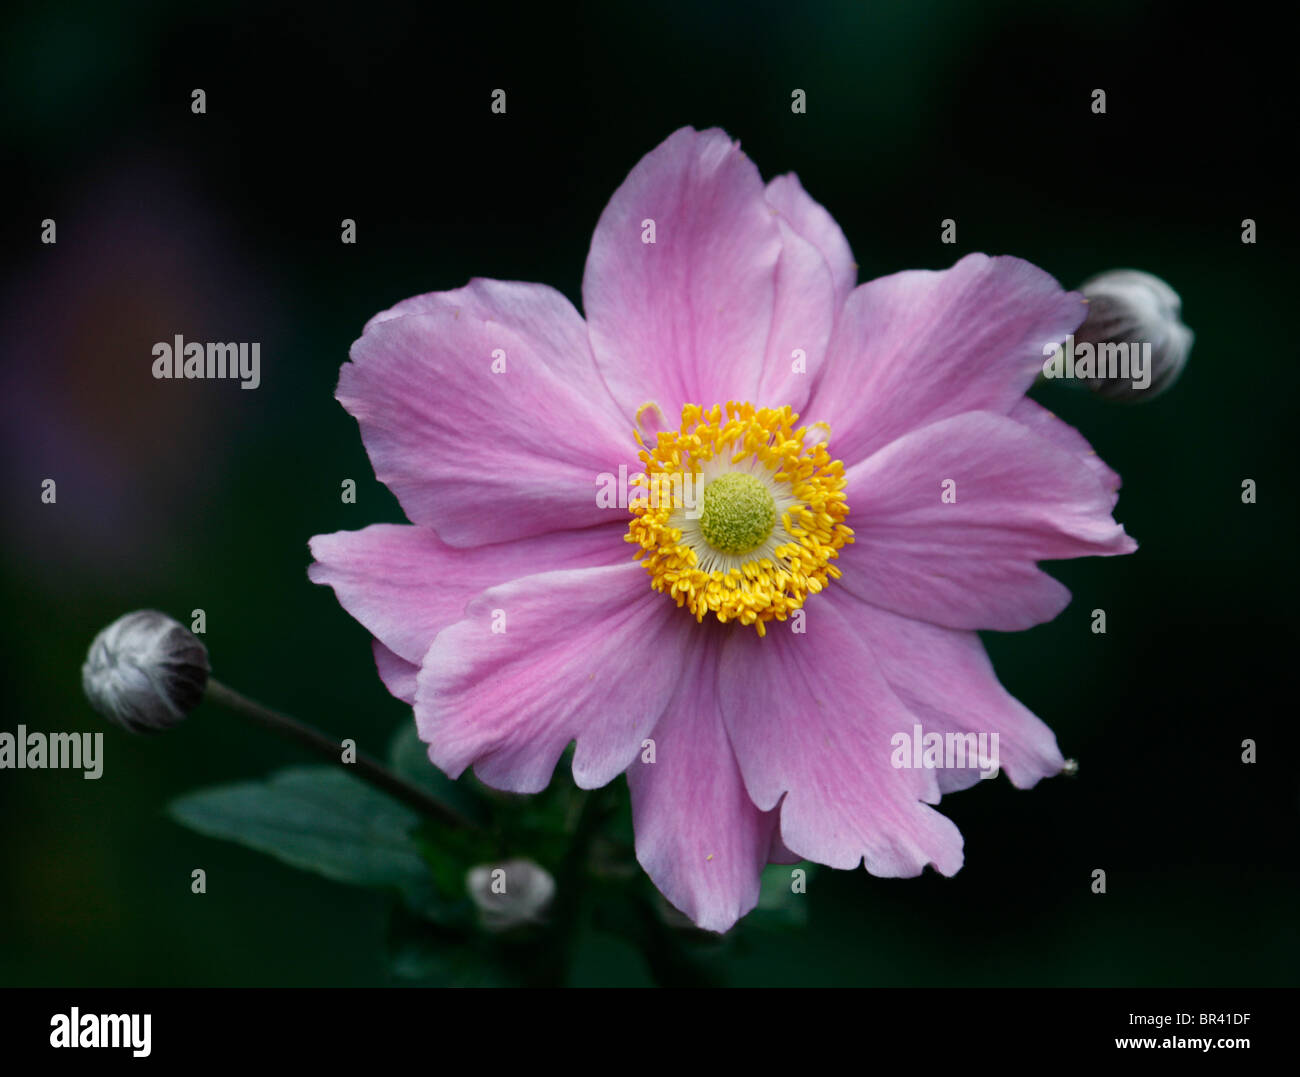 Pink Japanese anemone (anemone x hybrida) September Charm with a yellow centre Stock Photo